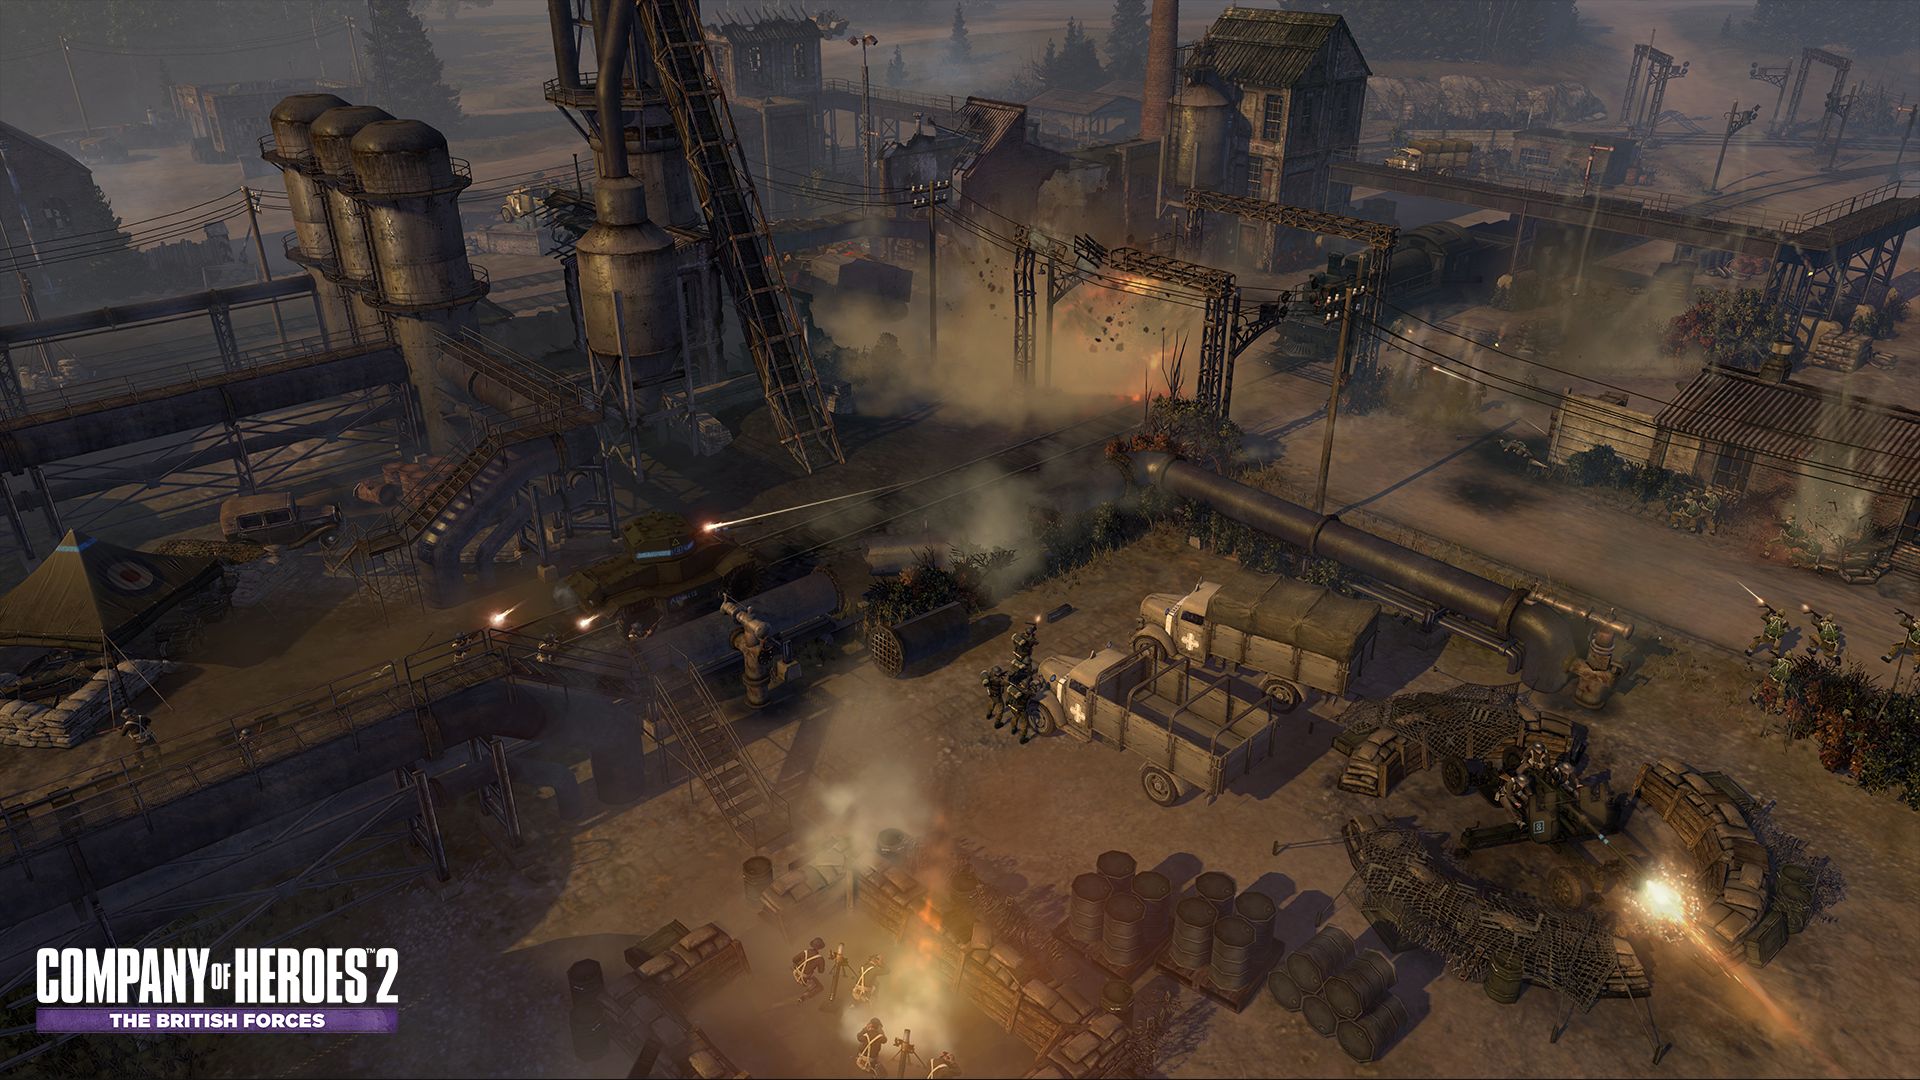 will there be company of heroes 3